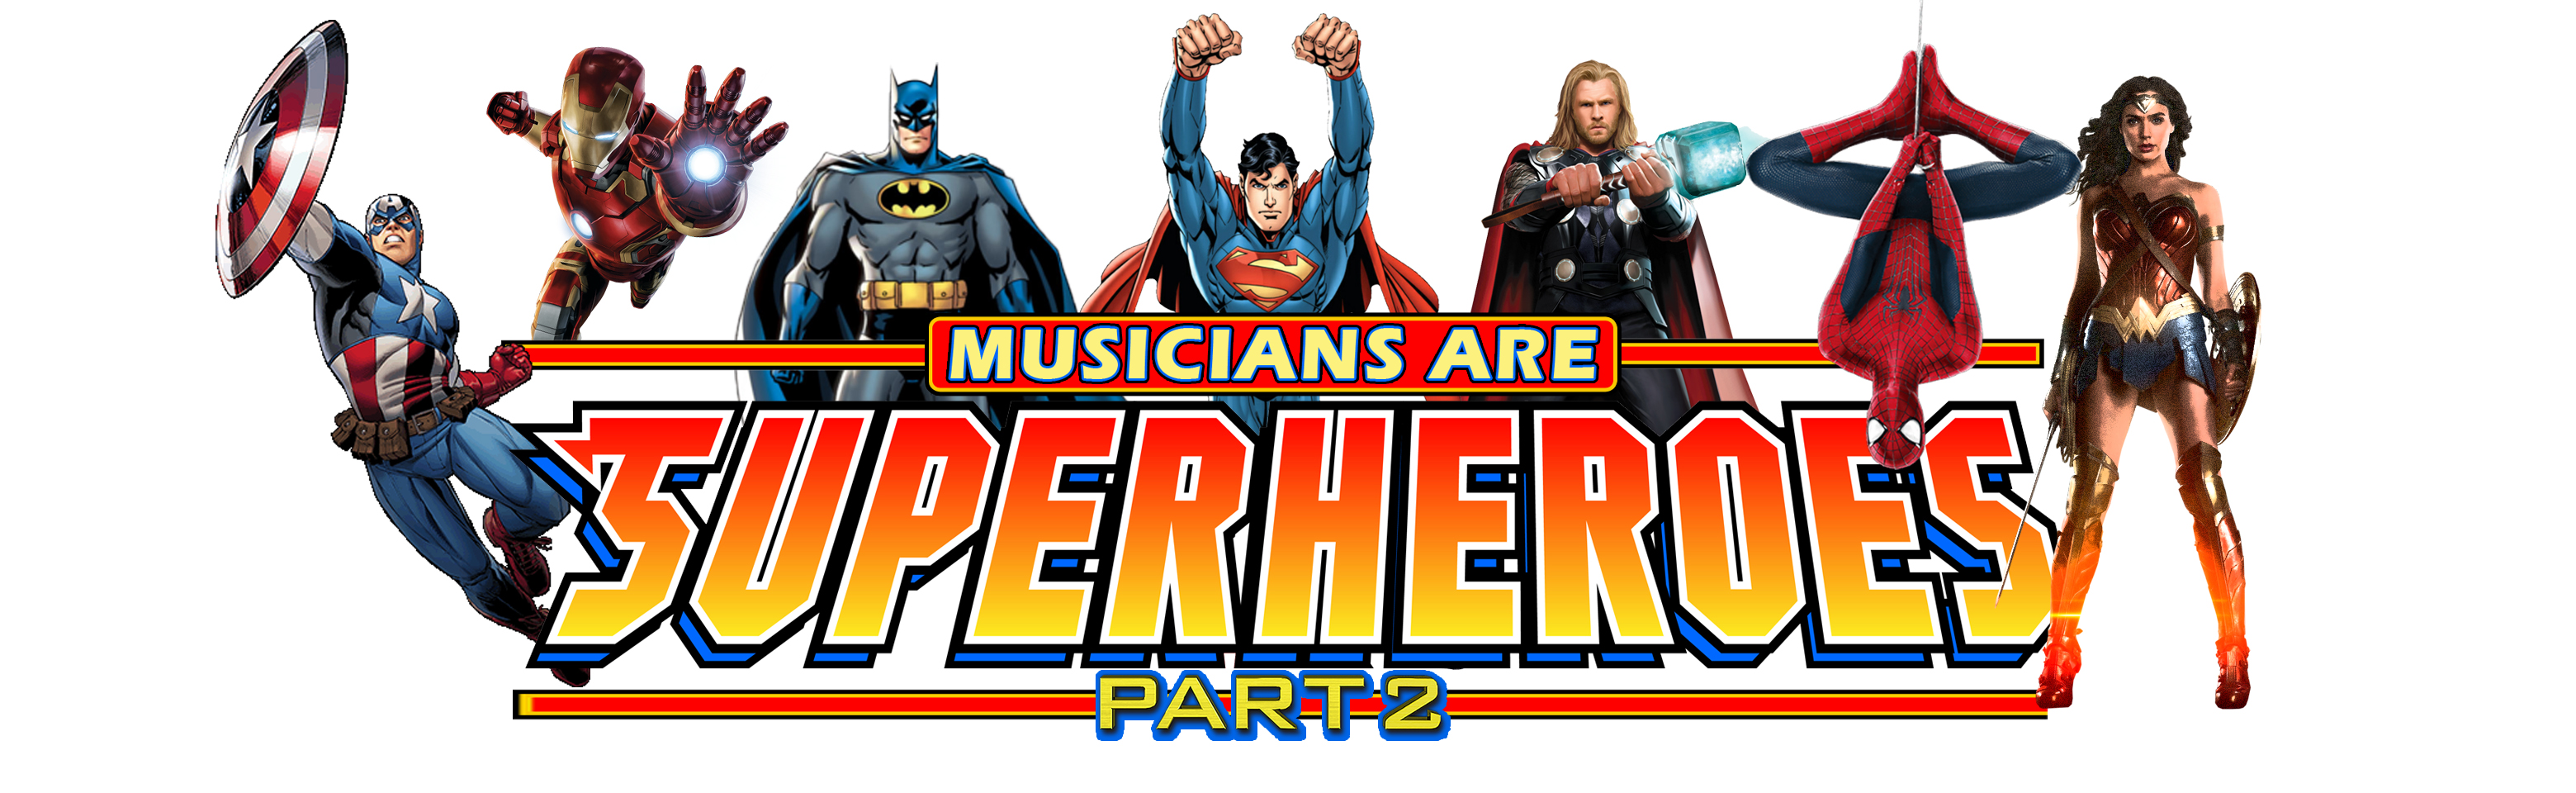 Musicians are Superheroes: Part II